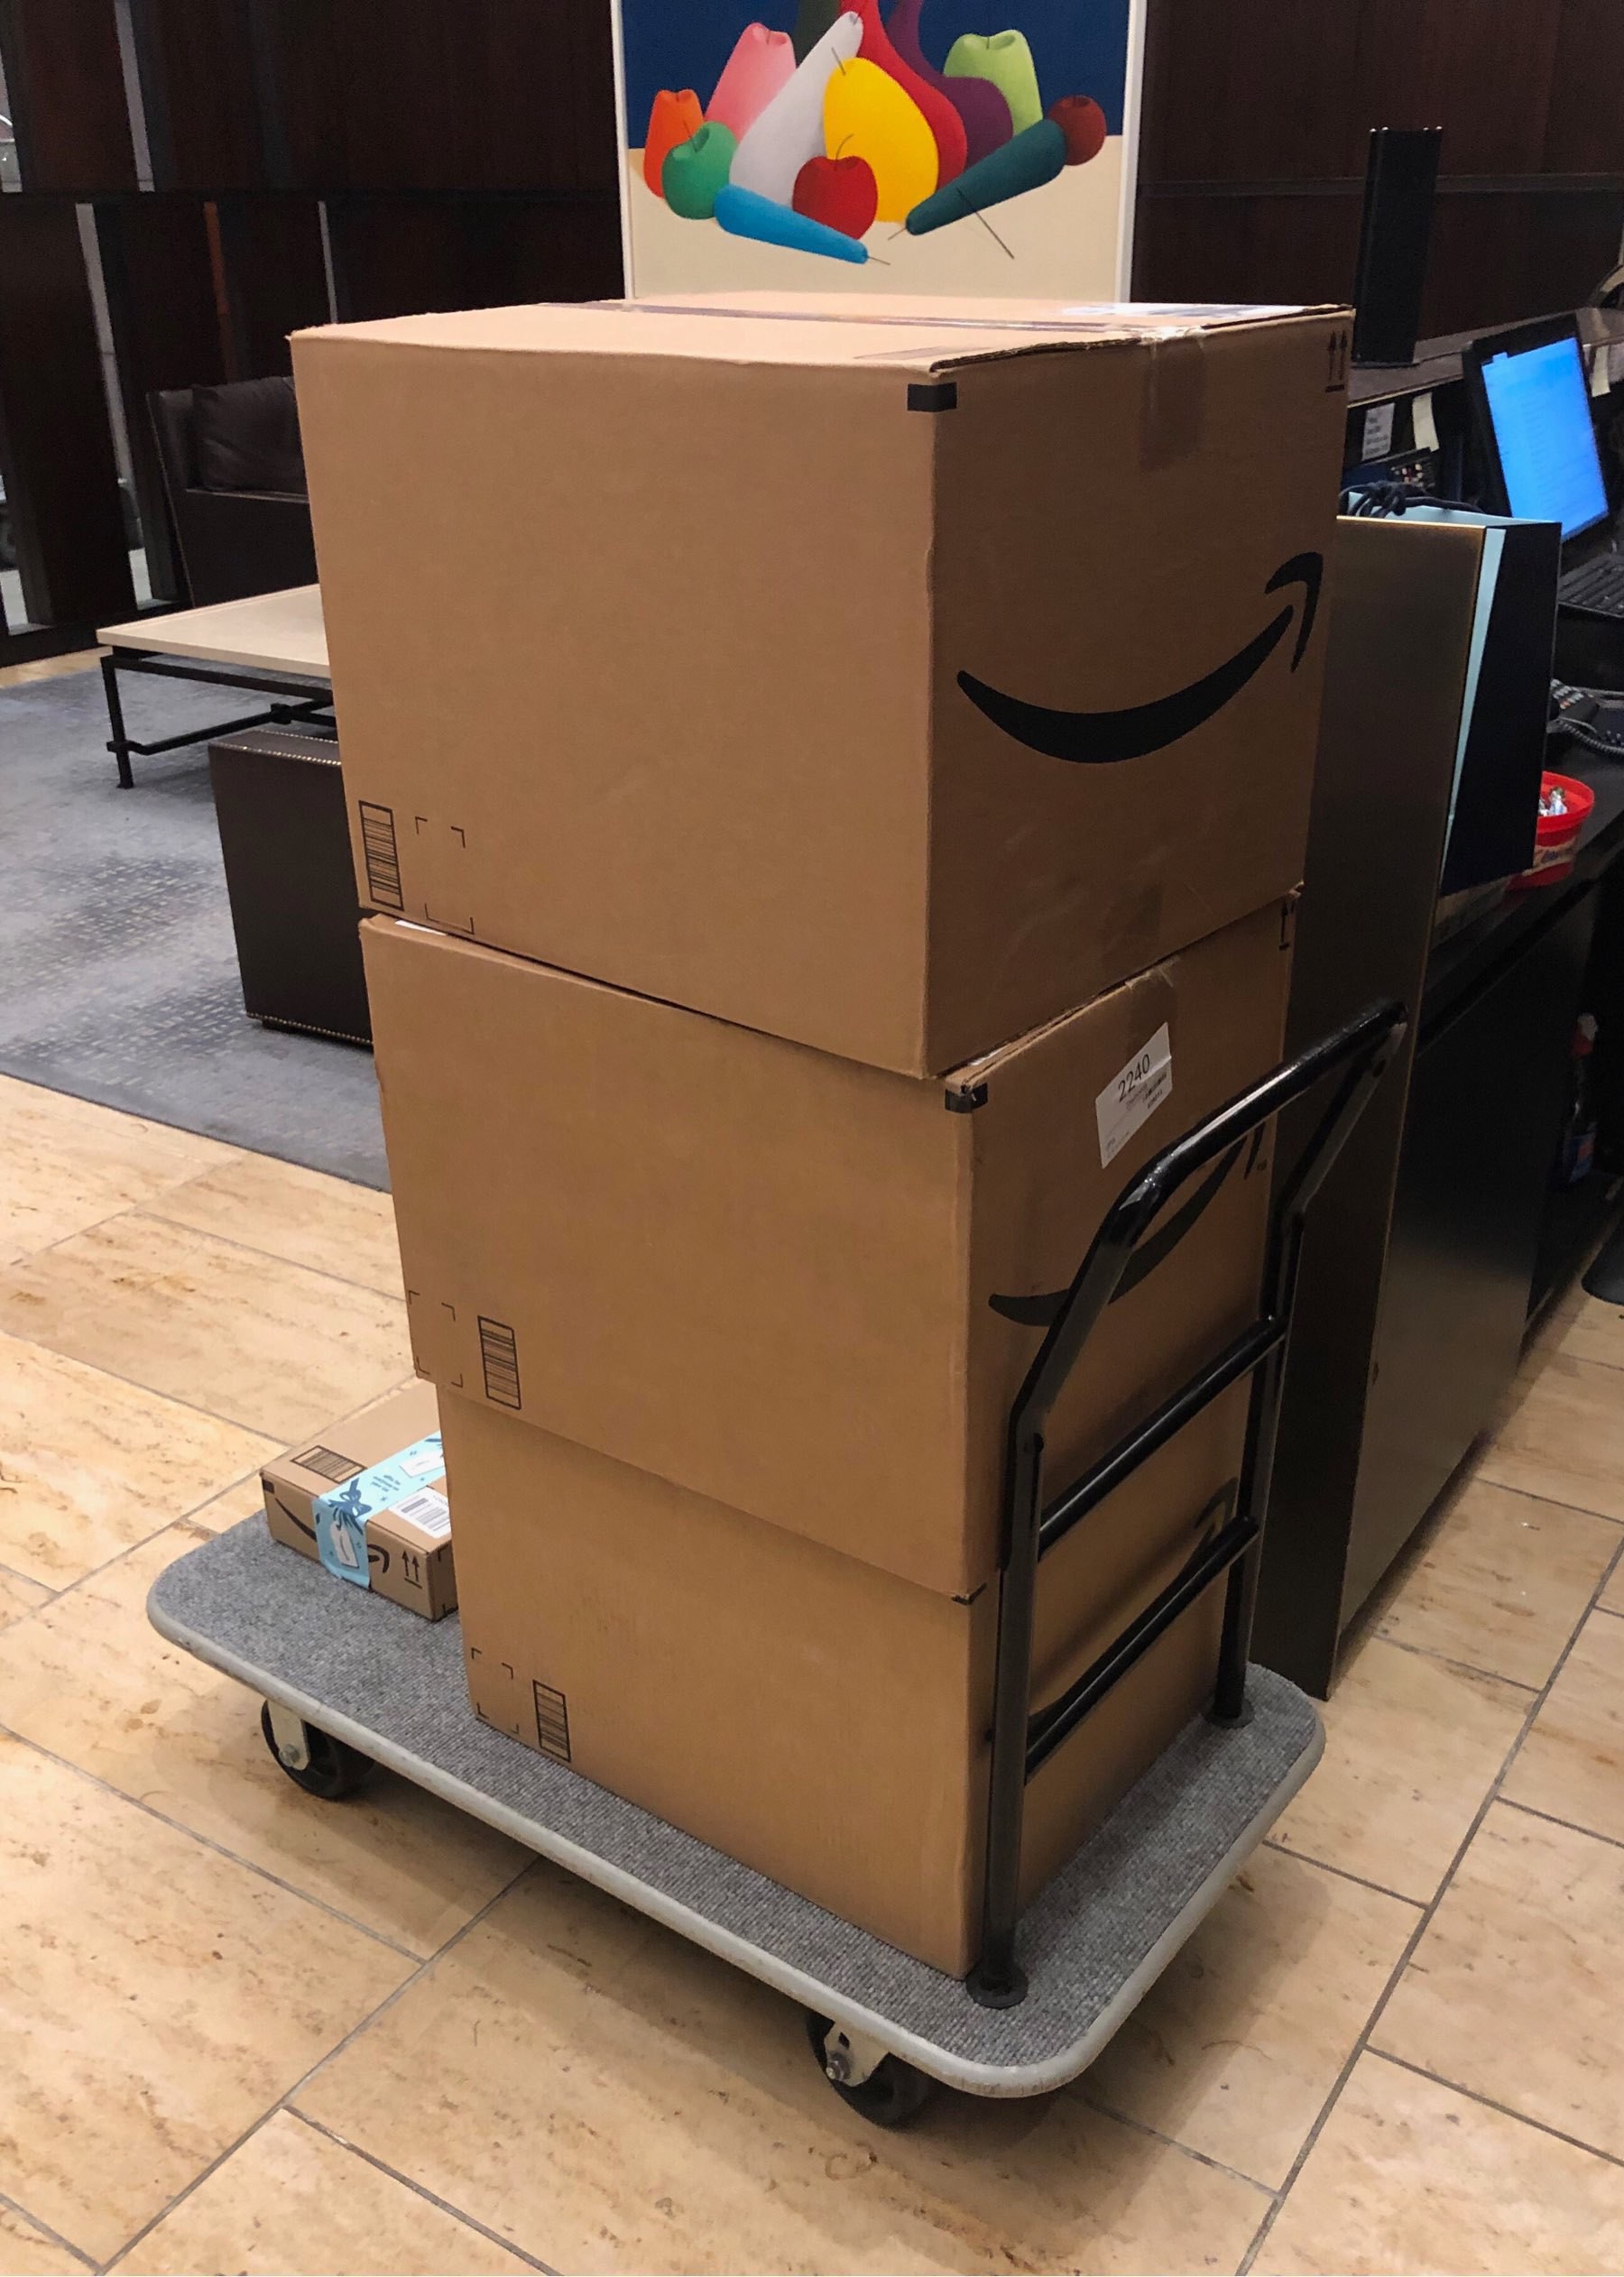 Three large amazon boxes on a rolling cart.